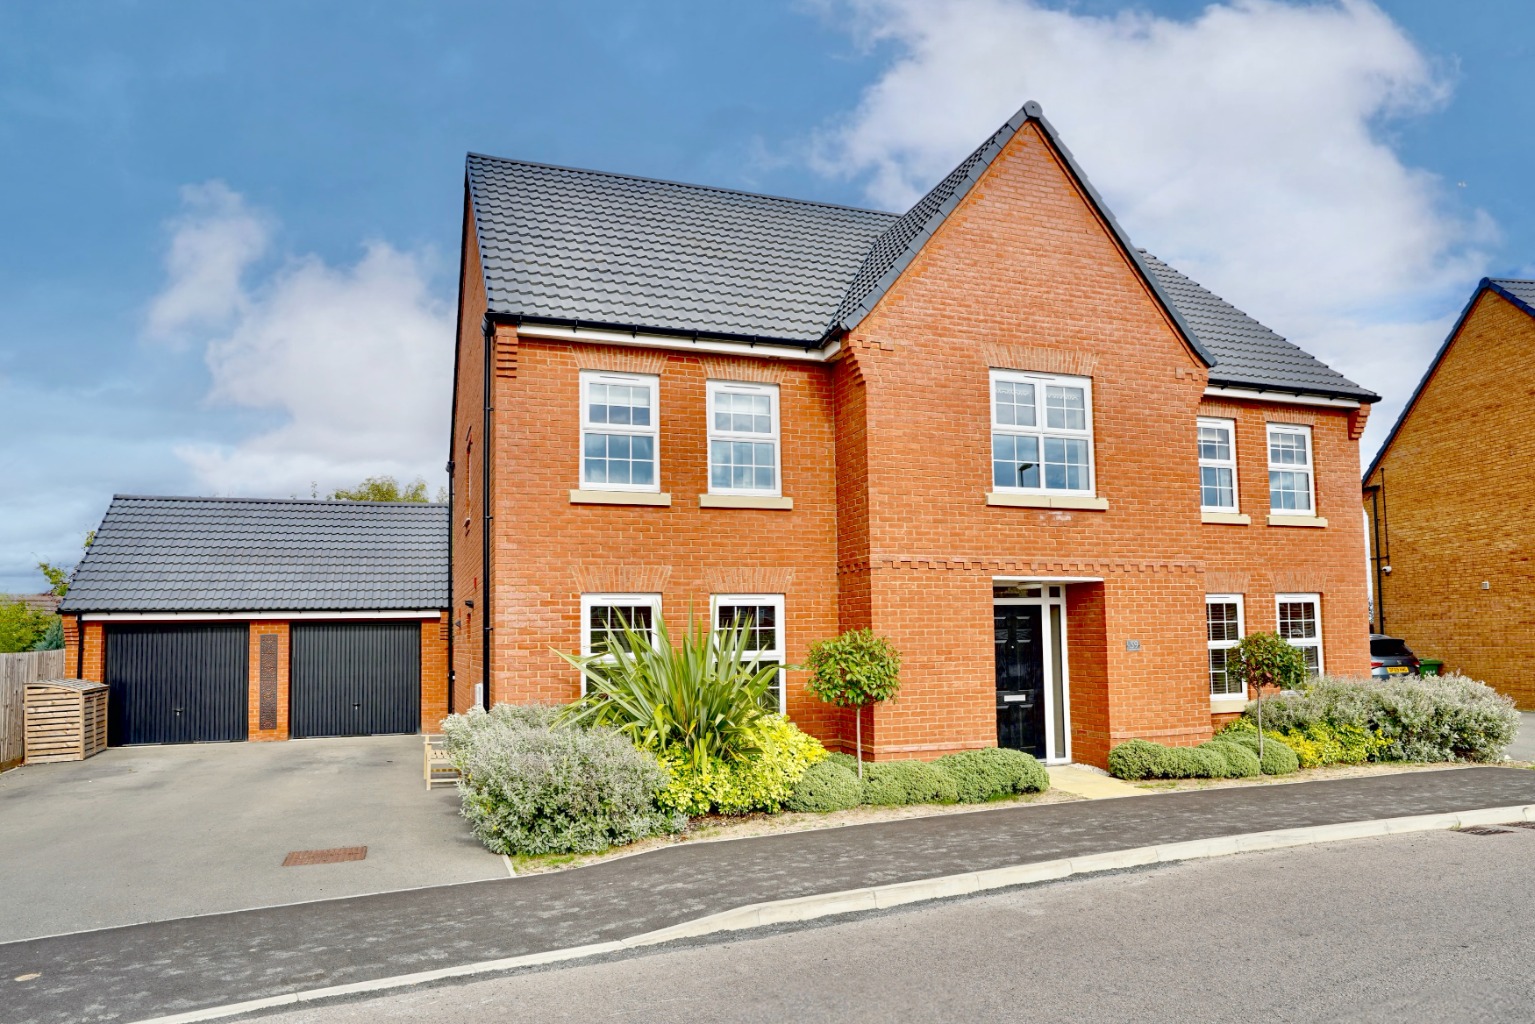 5 bed detached house for sale in Mahaddie Way, Huntingdon - Property Image 1